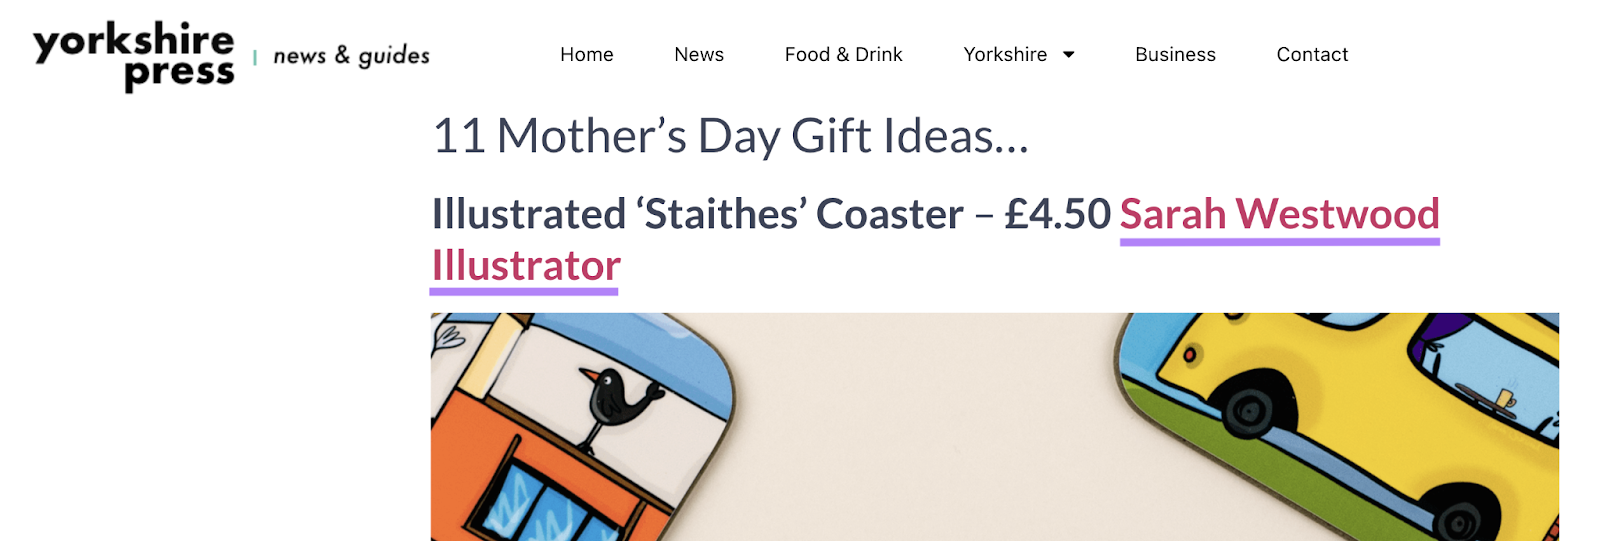 backlink to an illustrator in the mother's day gift ideas guide